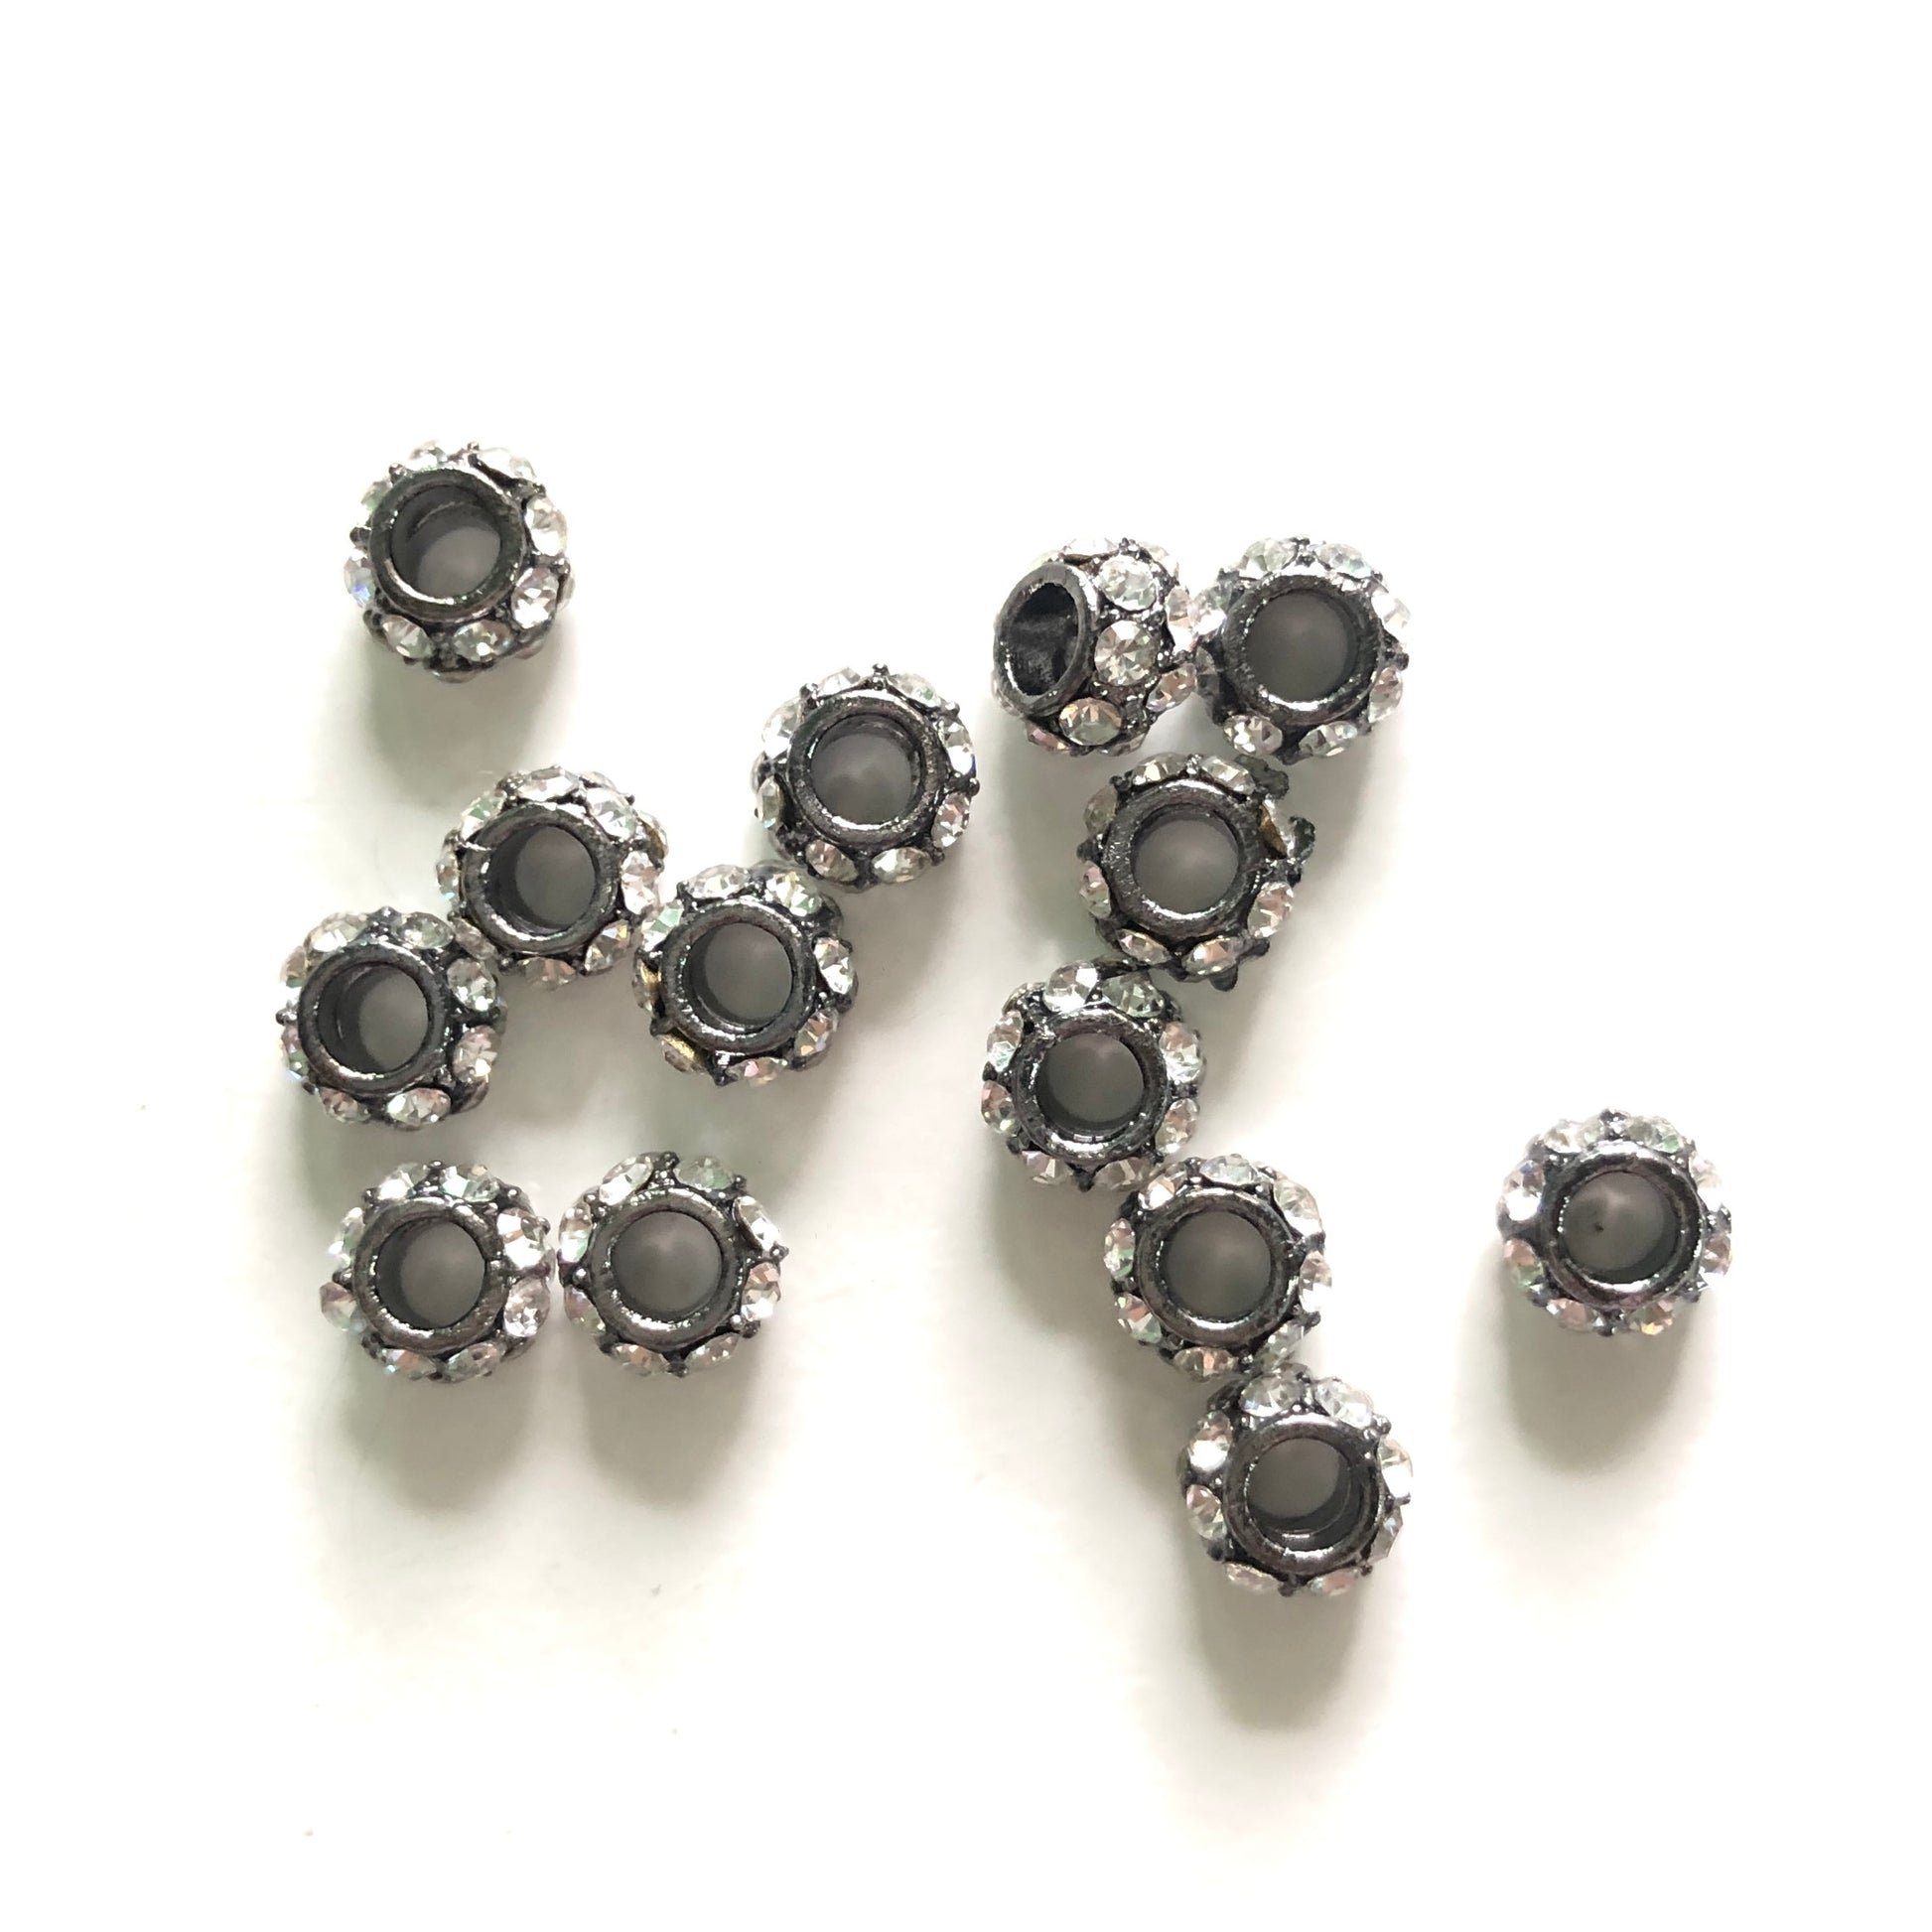 20-50pcs/lot 6mm Clear Rhinestone Paved Alloy Wheel Spacers Black Alloy Spacers & Wholesale Charms Beads Beyond